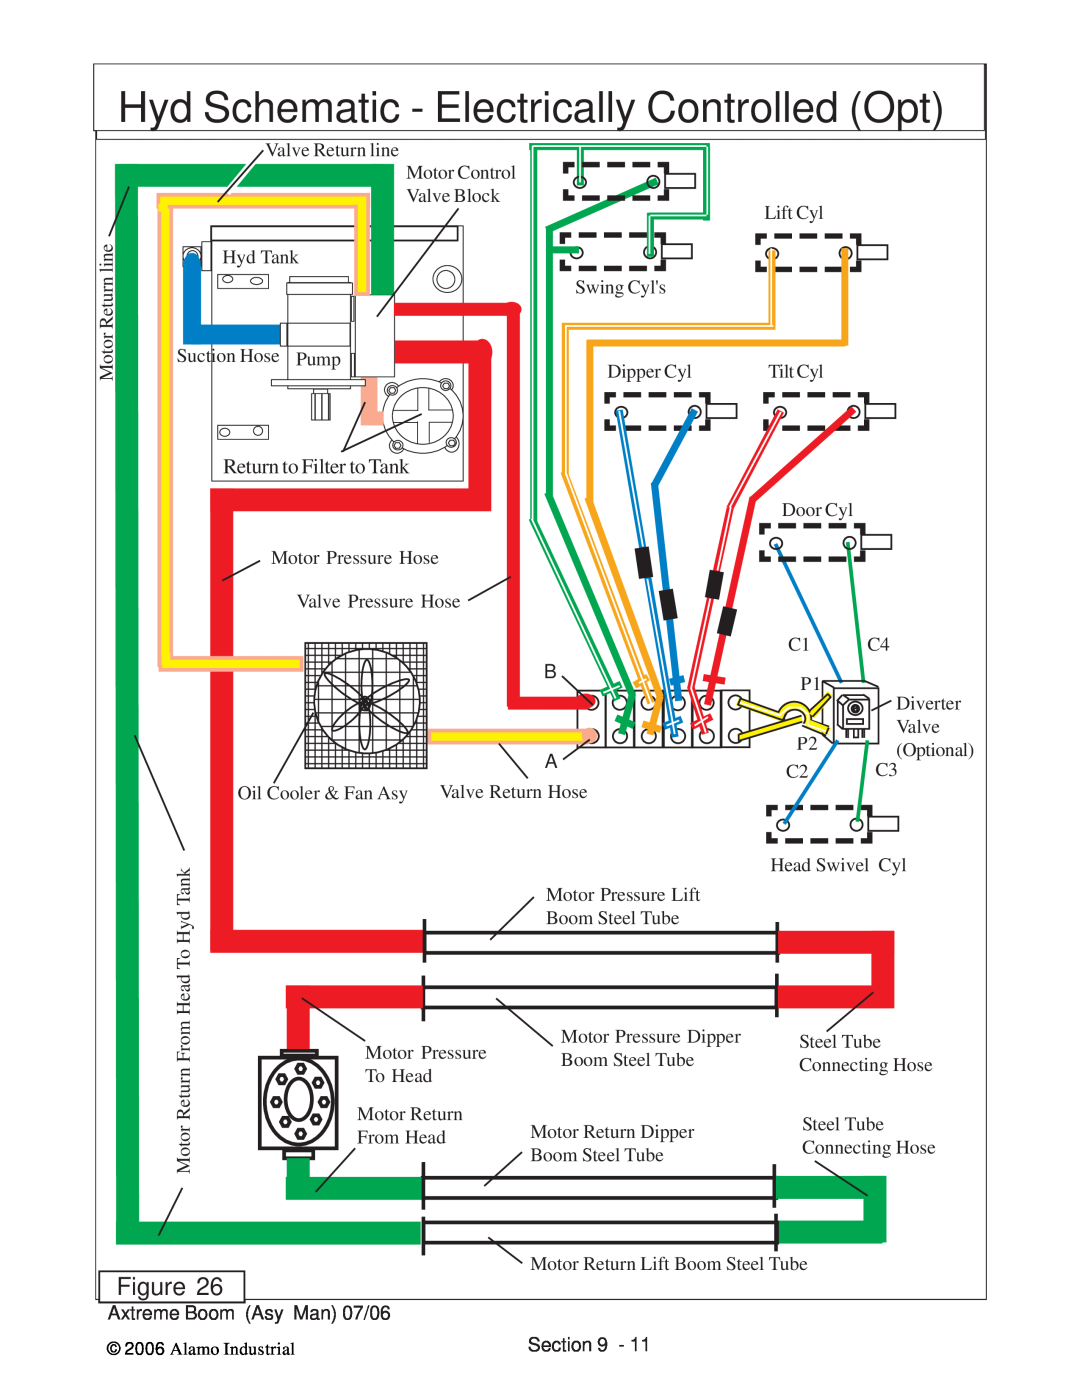 Alamo 02984405 instruction manual Hyd Schematic - Electrically Controlled Opt, Return to Filter to Tank 